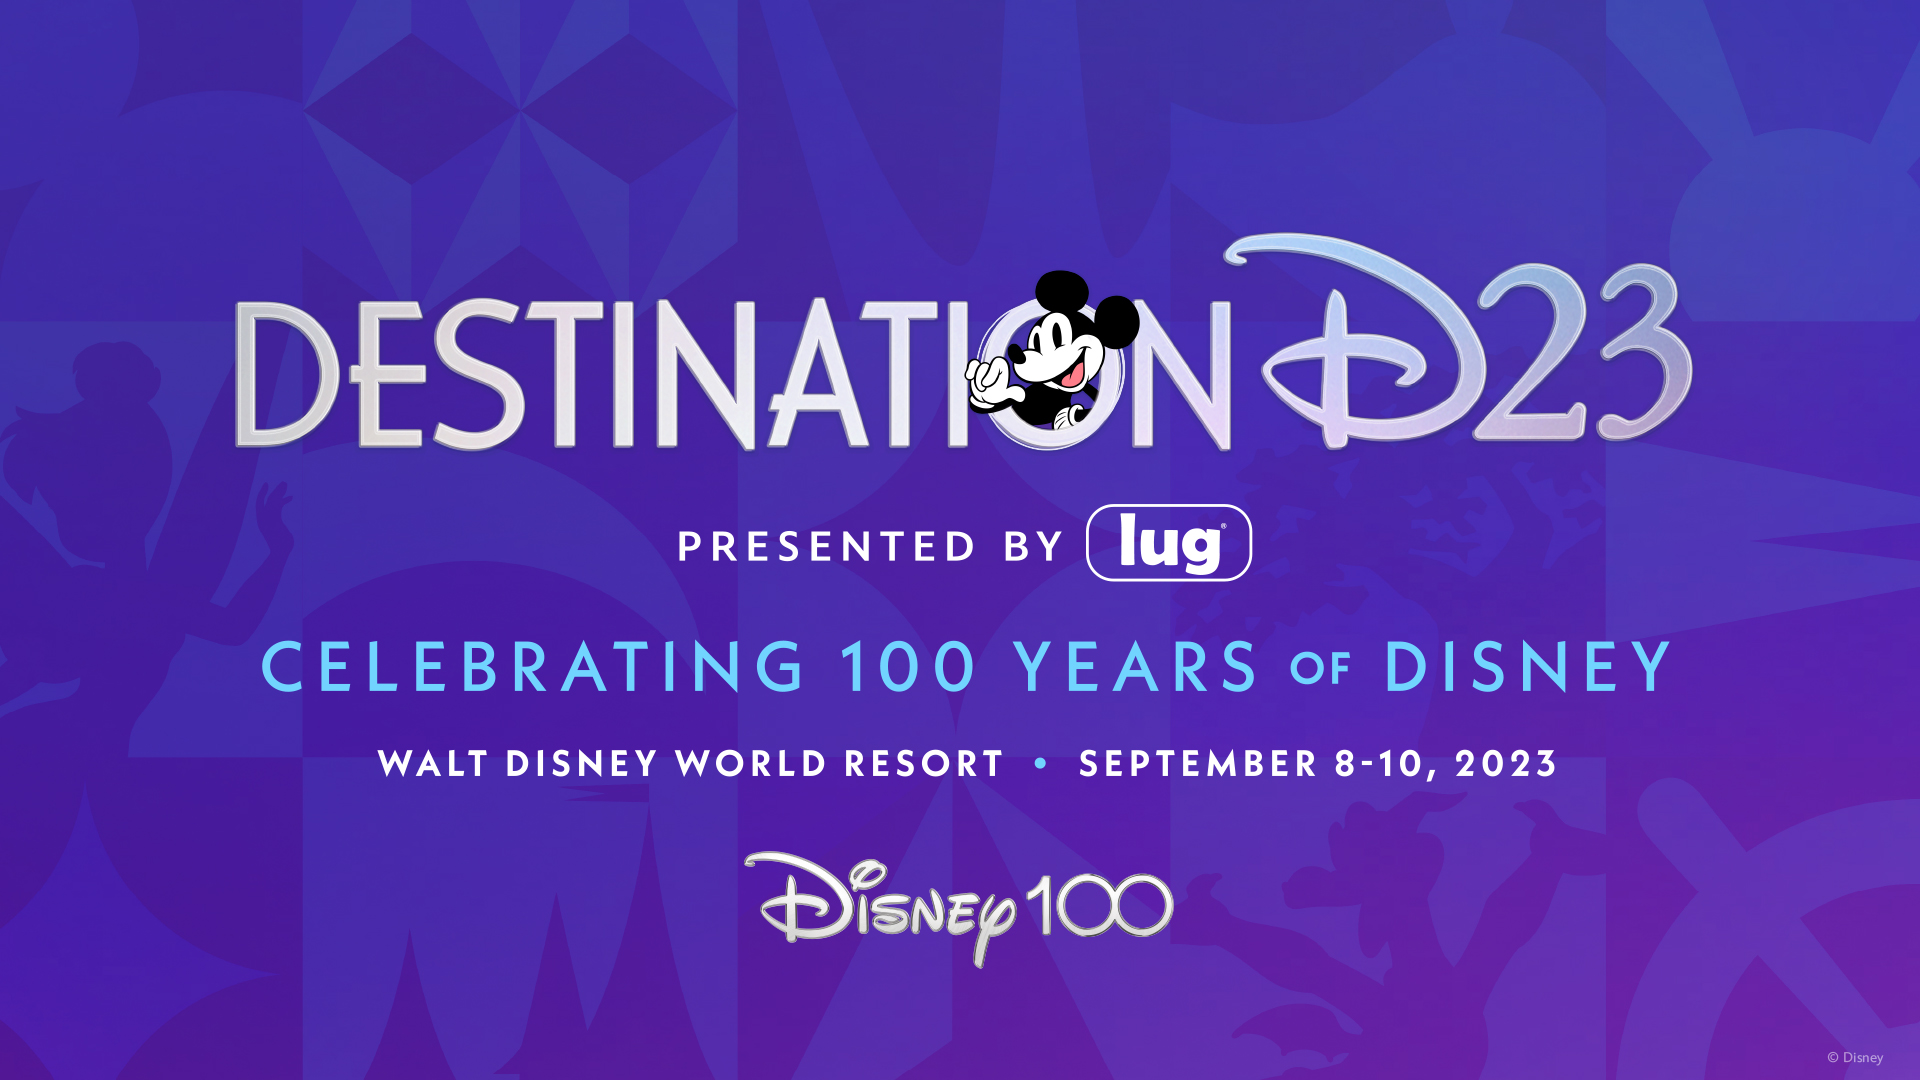 Schedule Released for Destination D23